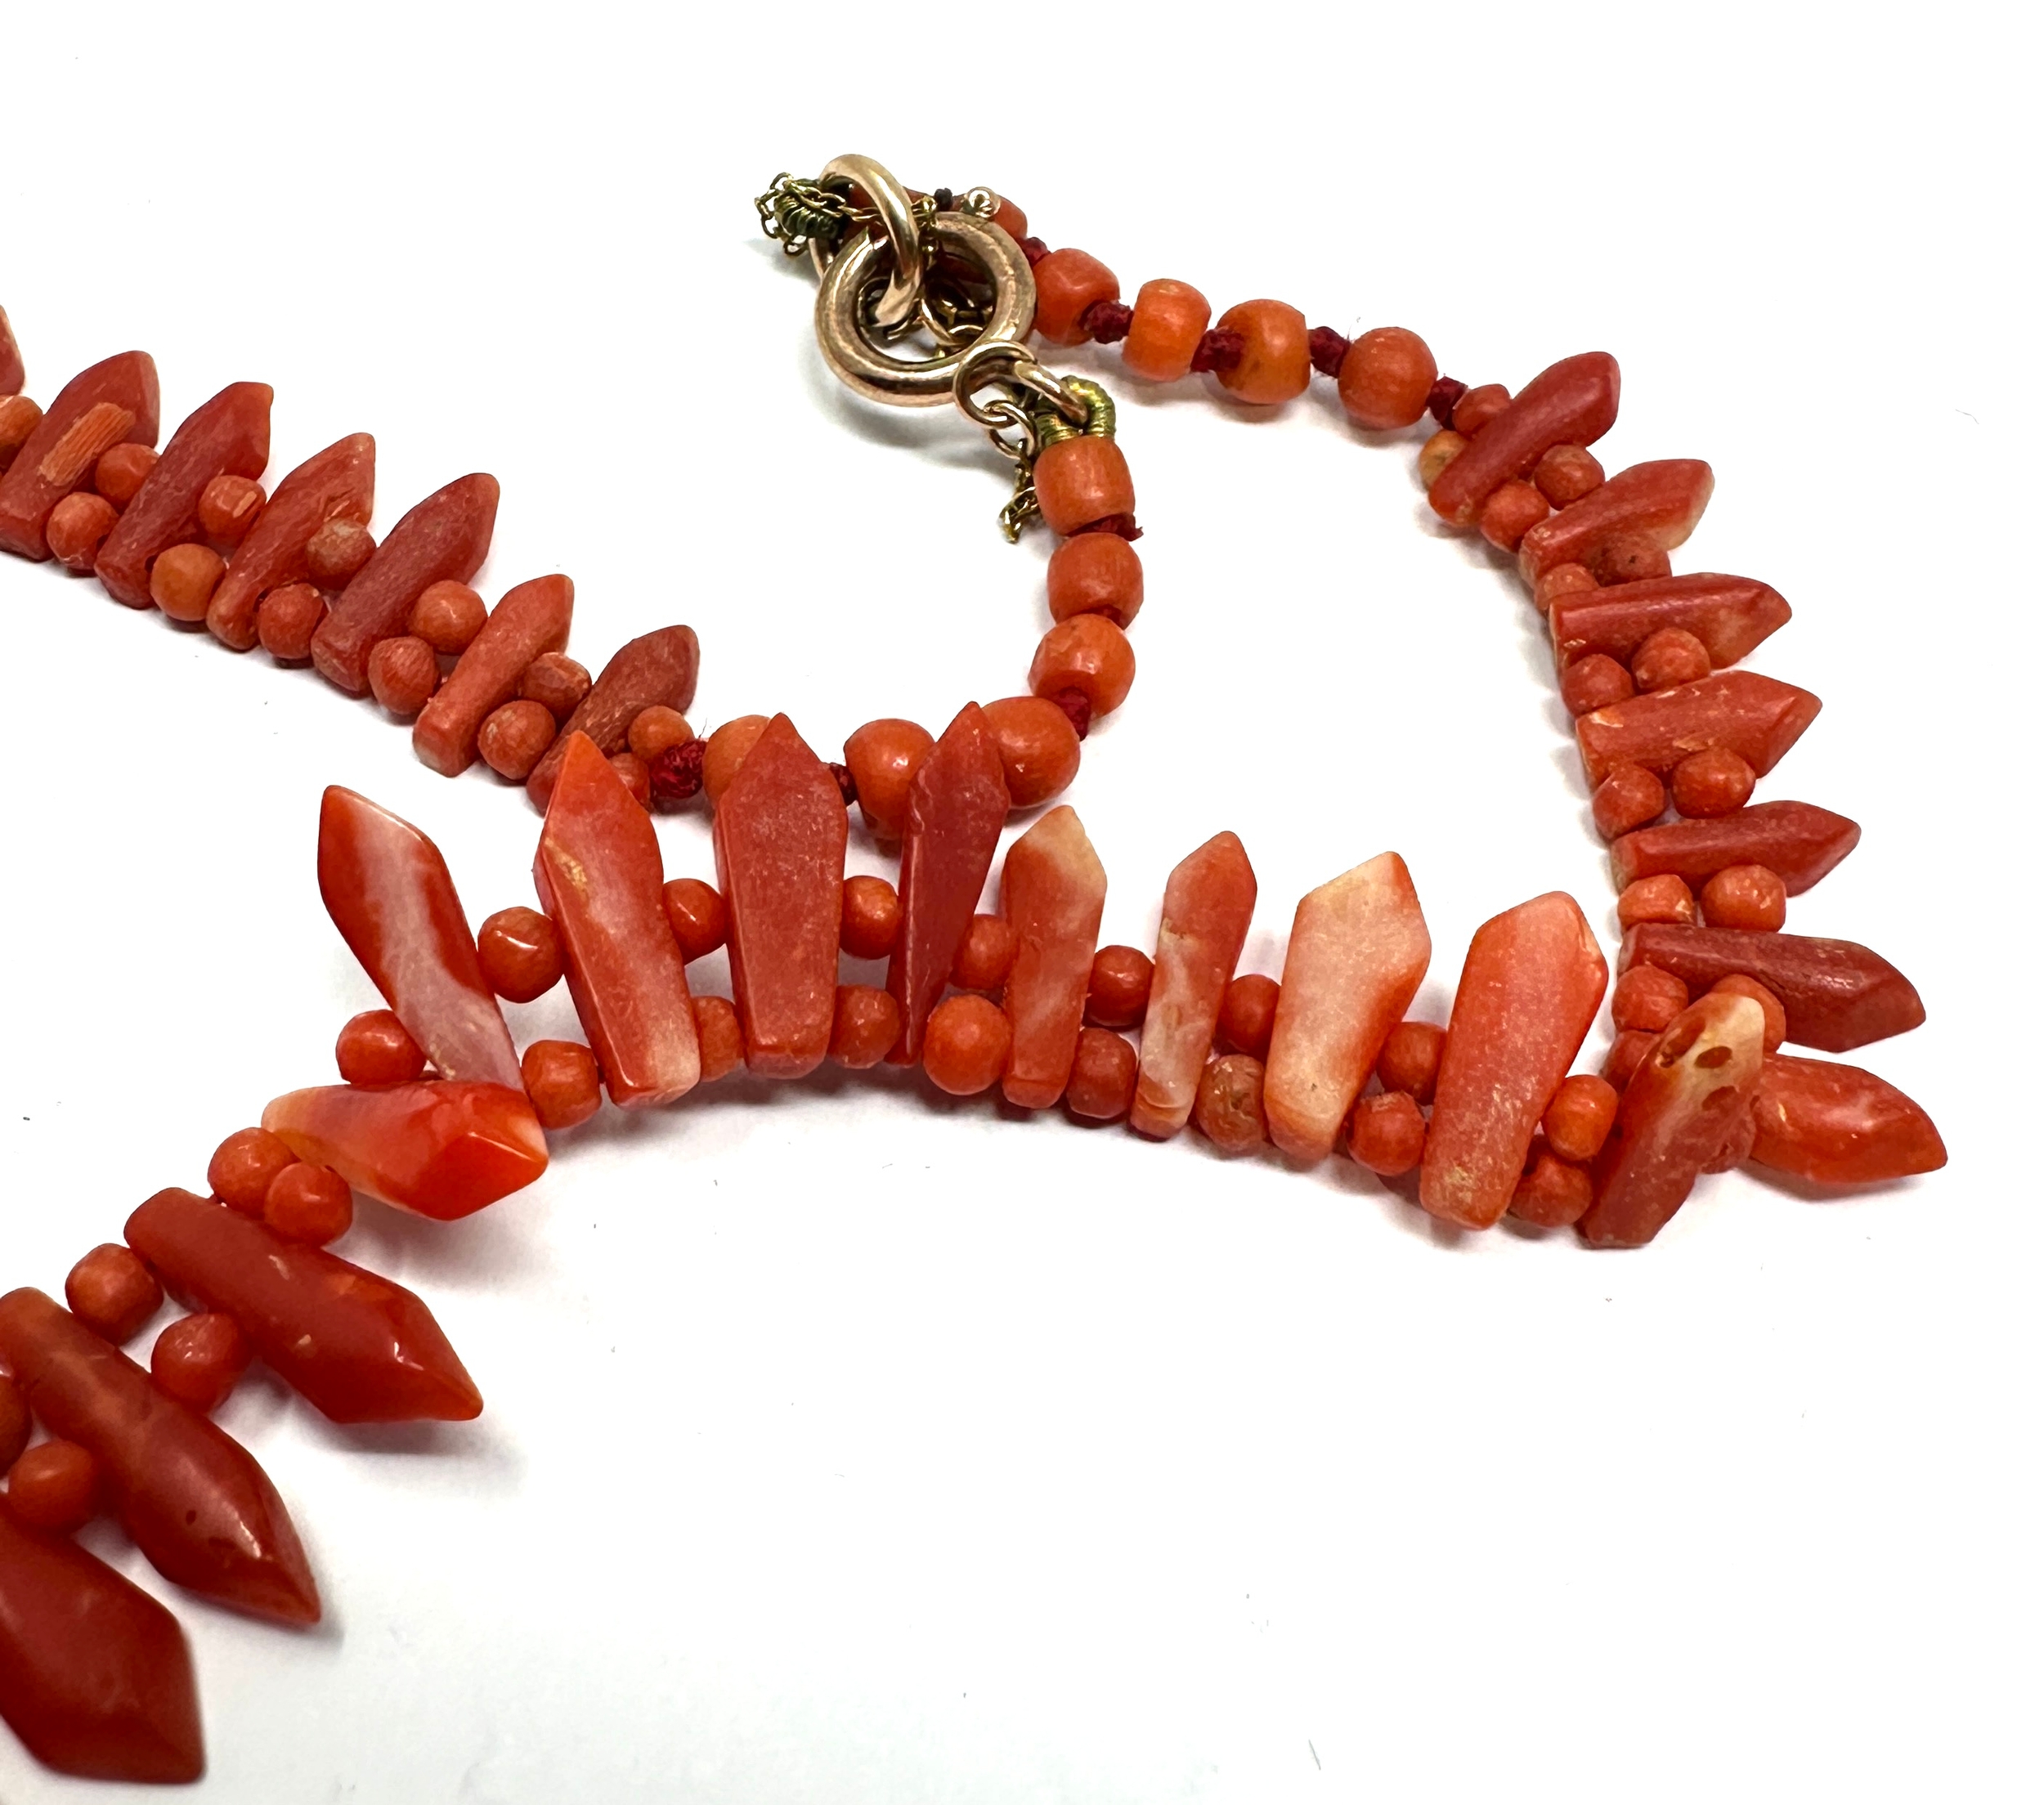 Antique 9ct gold clasp coral collar necklace weight 33g - Image 3 of 4